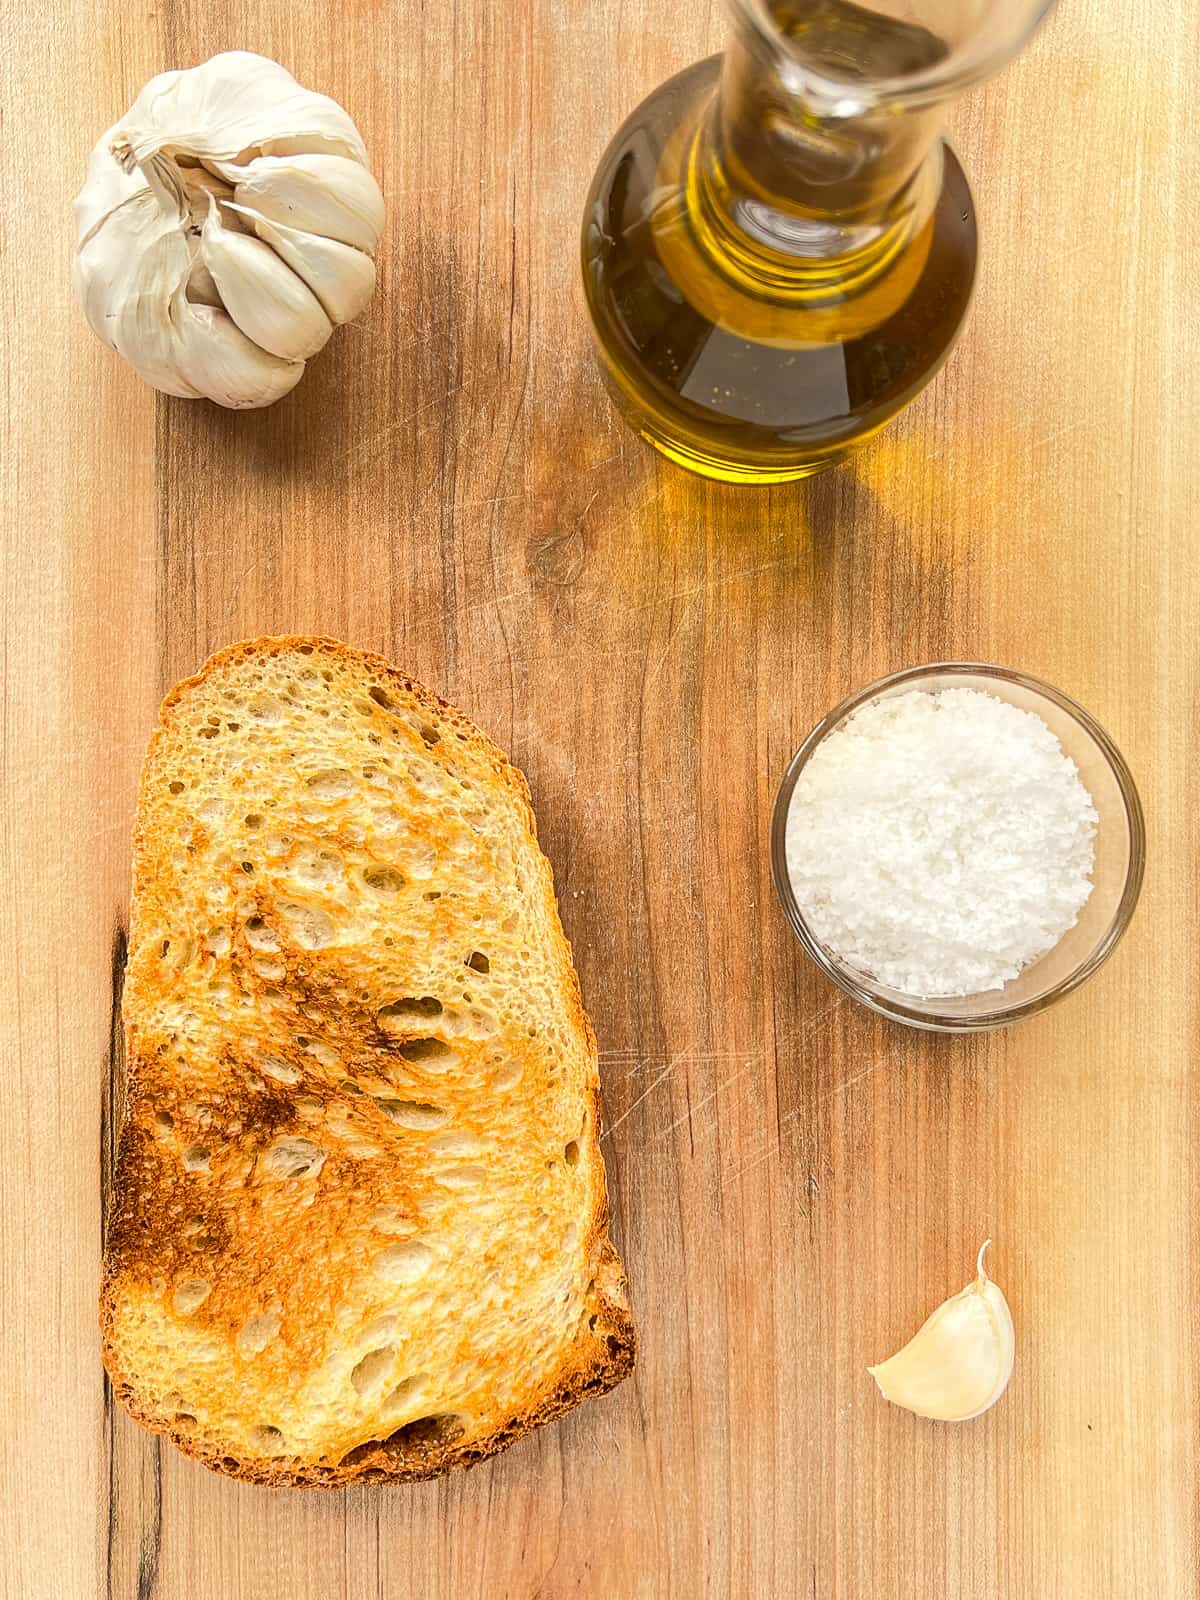 The ingredients needs for garlic toast